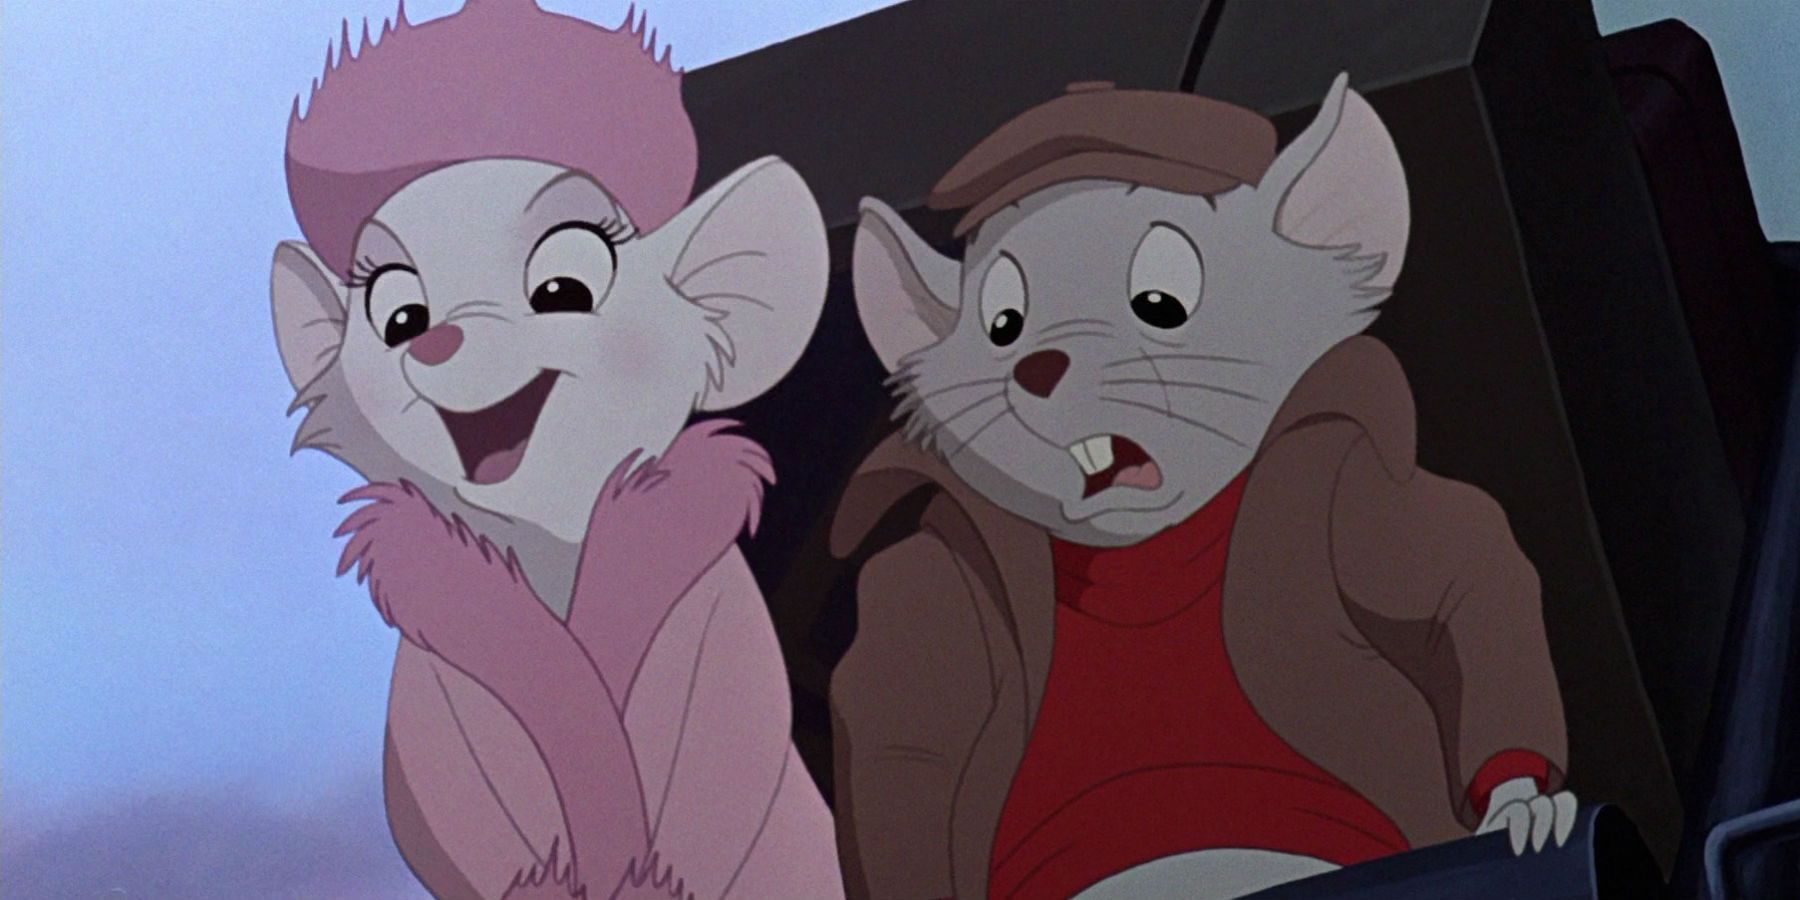 10 Overlooked Disney Movies That Are Coming To Disney